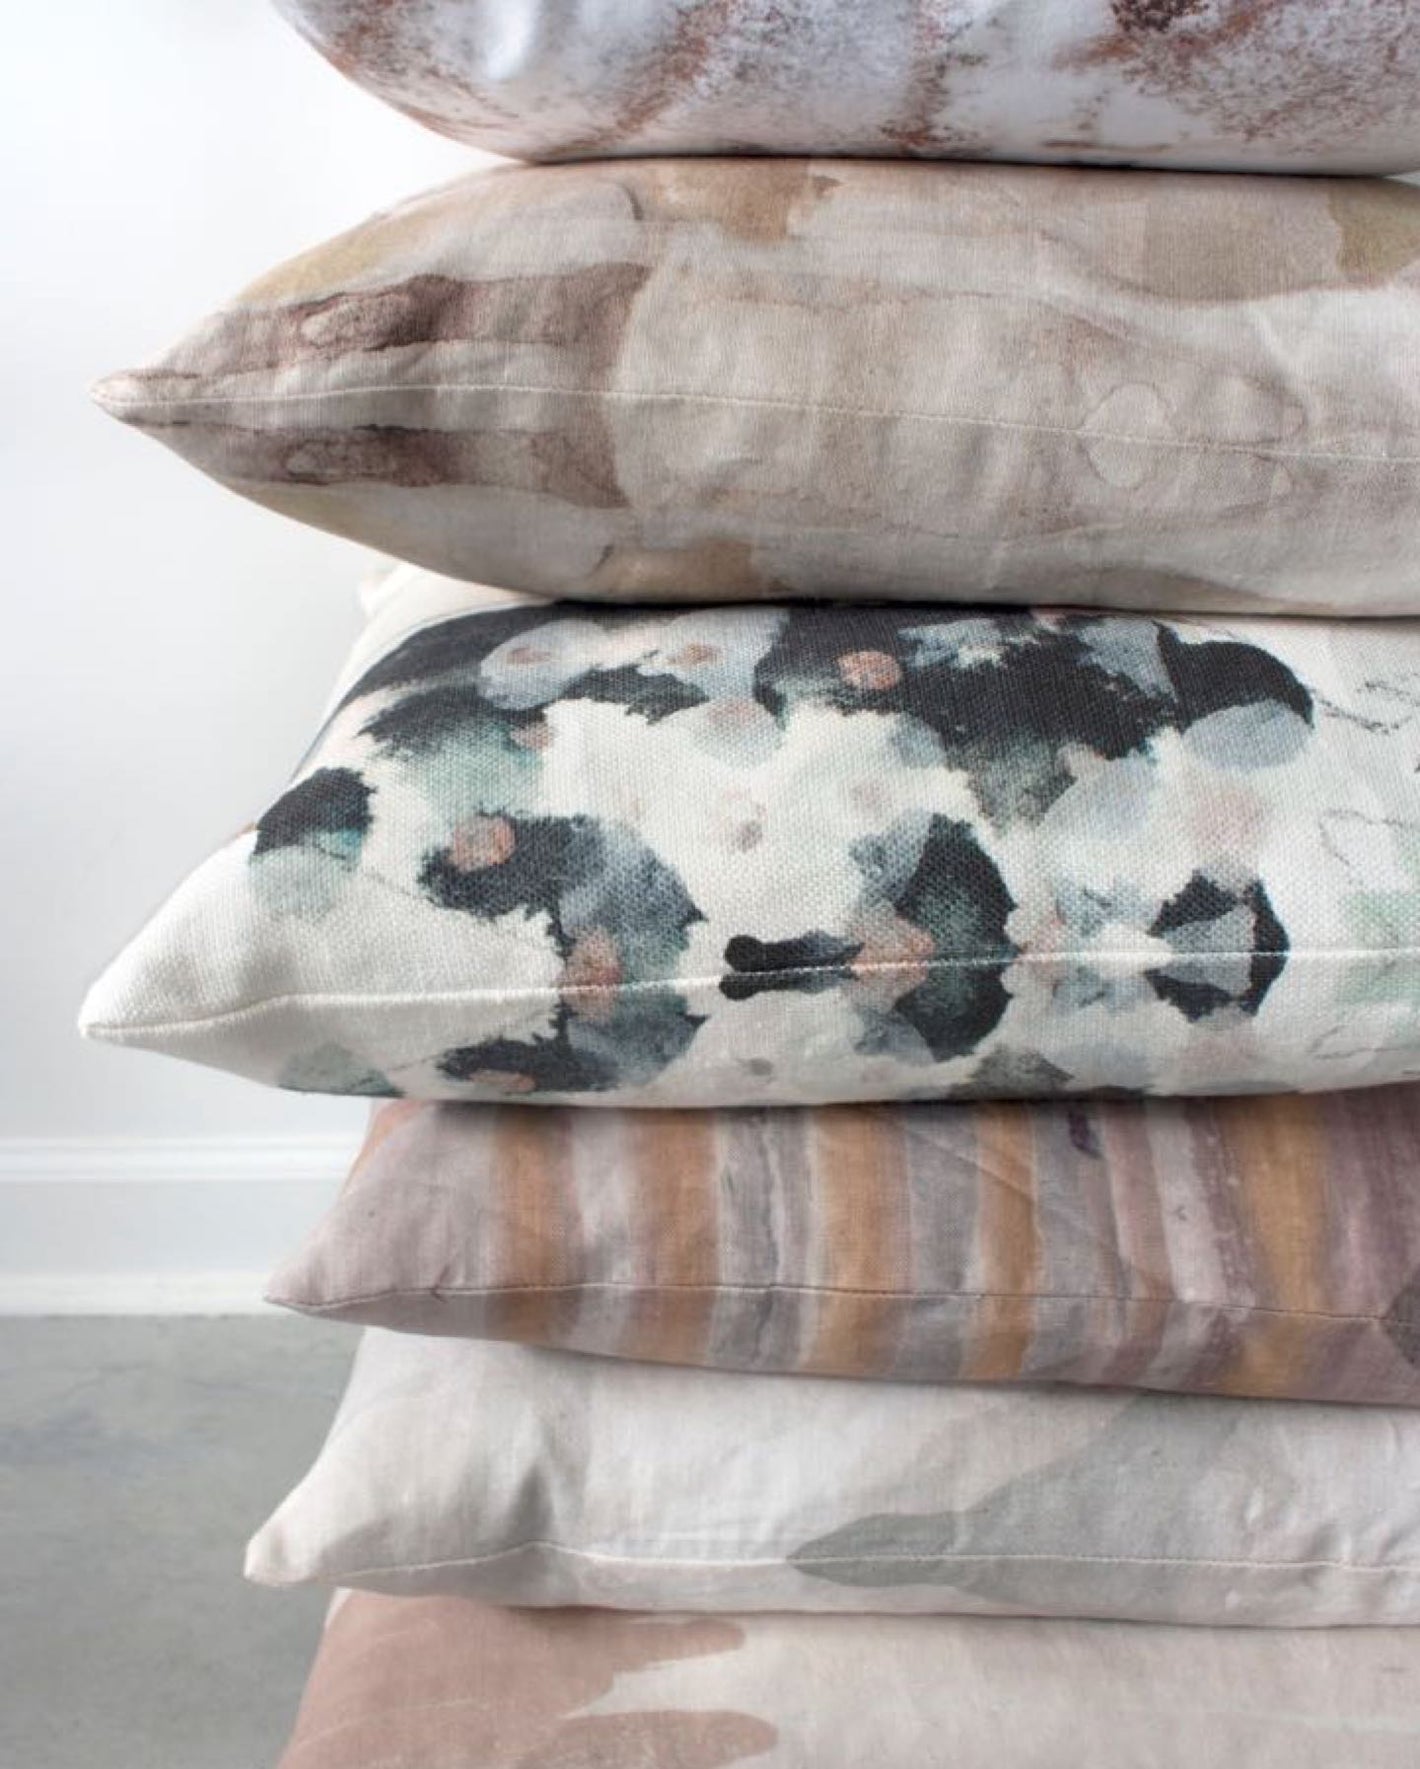 A stack of pillows stacked on top of each other